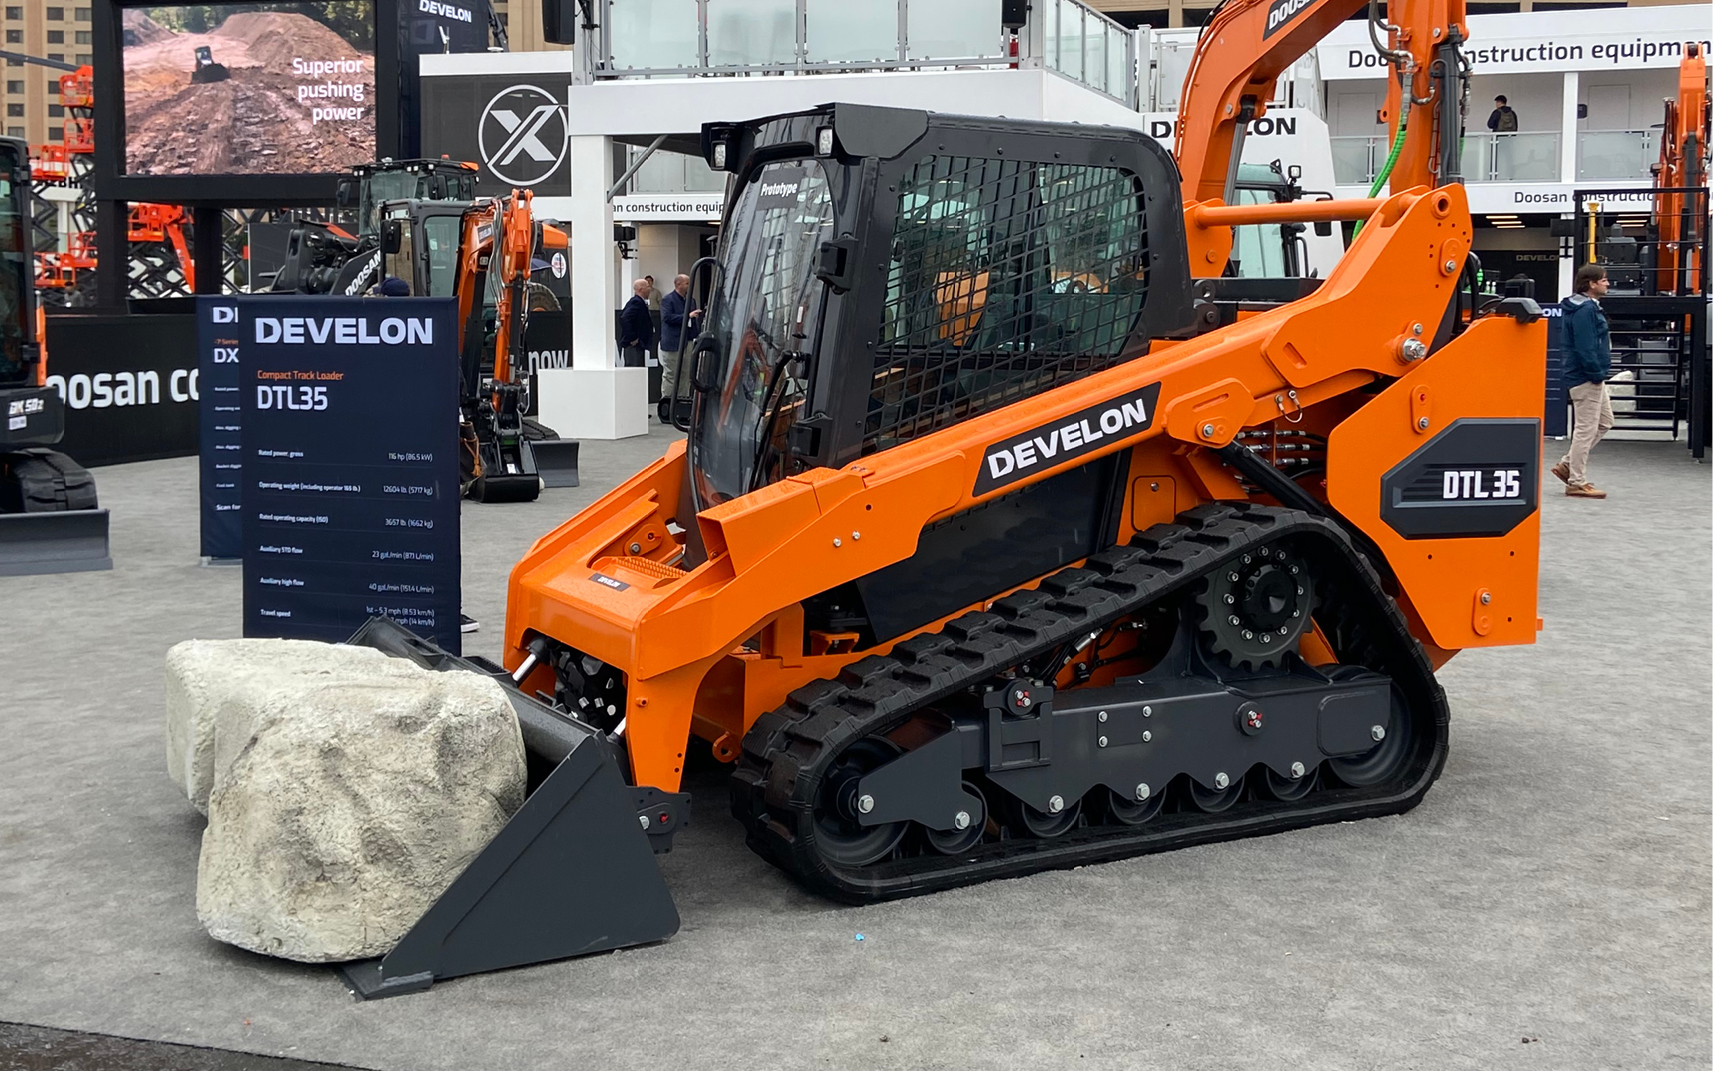 A DEVELON compact track loader and bucket attachment on display at CONEXPO-CON/AGG.